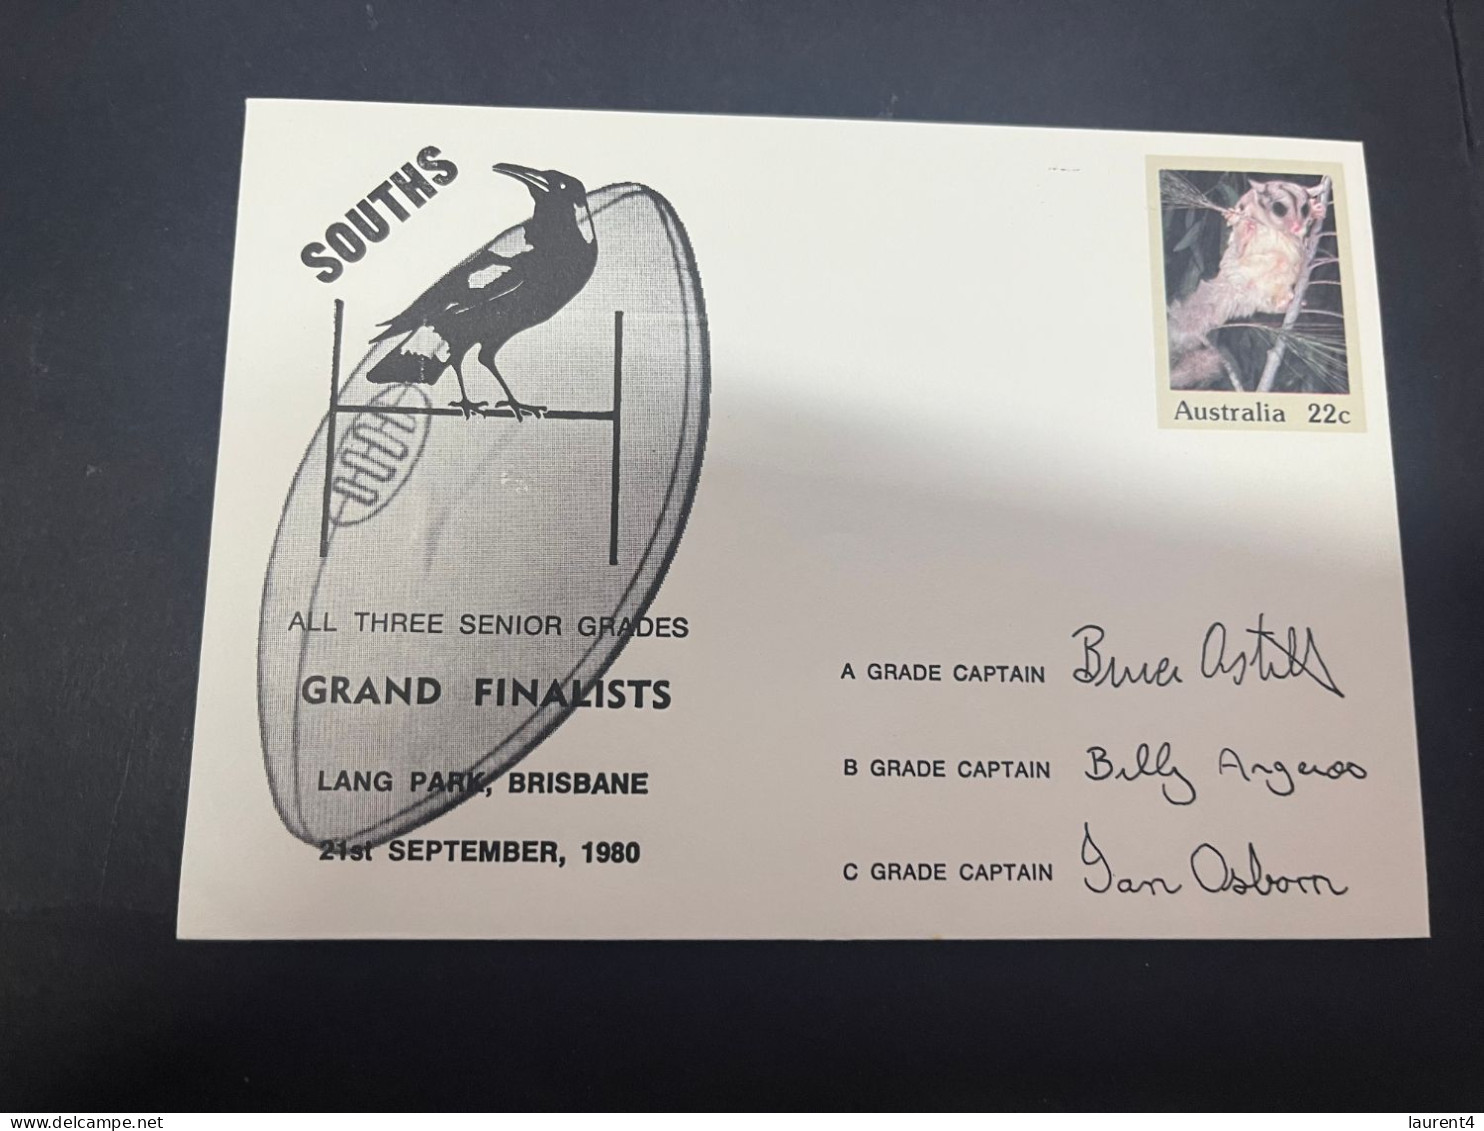 1-5-2023 (3 Z 39) Australia FDC (1 Covers) 1980 - OZ Football - South (magpies) Grand Finalists (signed - Sugar Glider) - Premiers Jours (FDC)